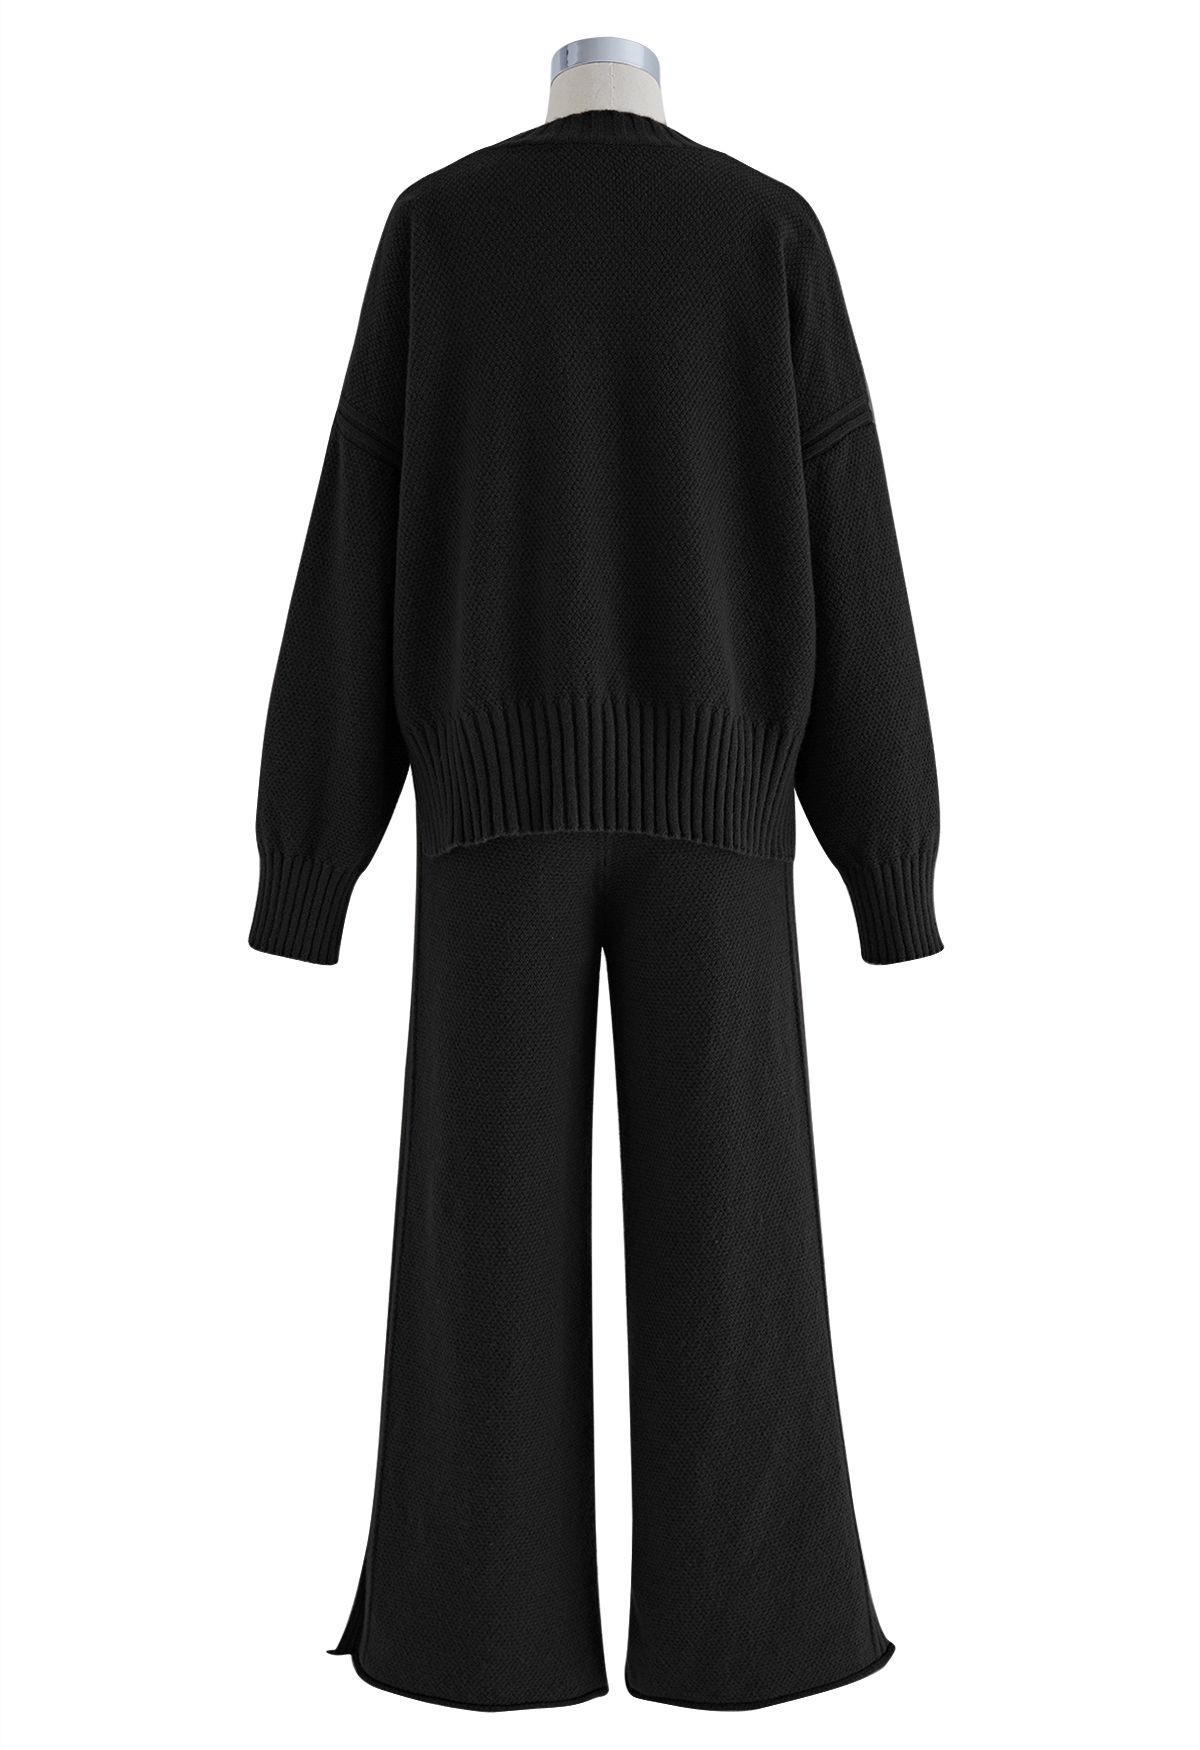 Waffle Knit Hi-Lo Sweater and Wide Leg Pants Set in Black